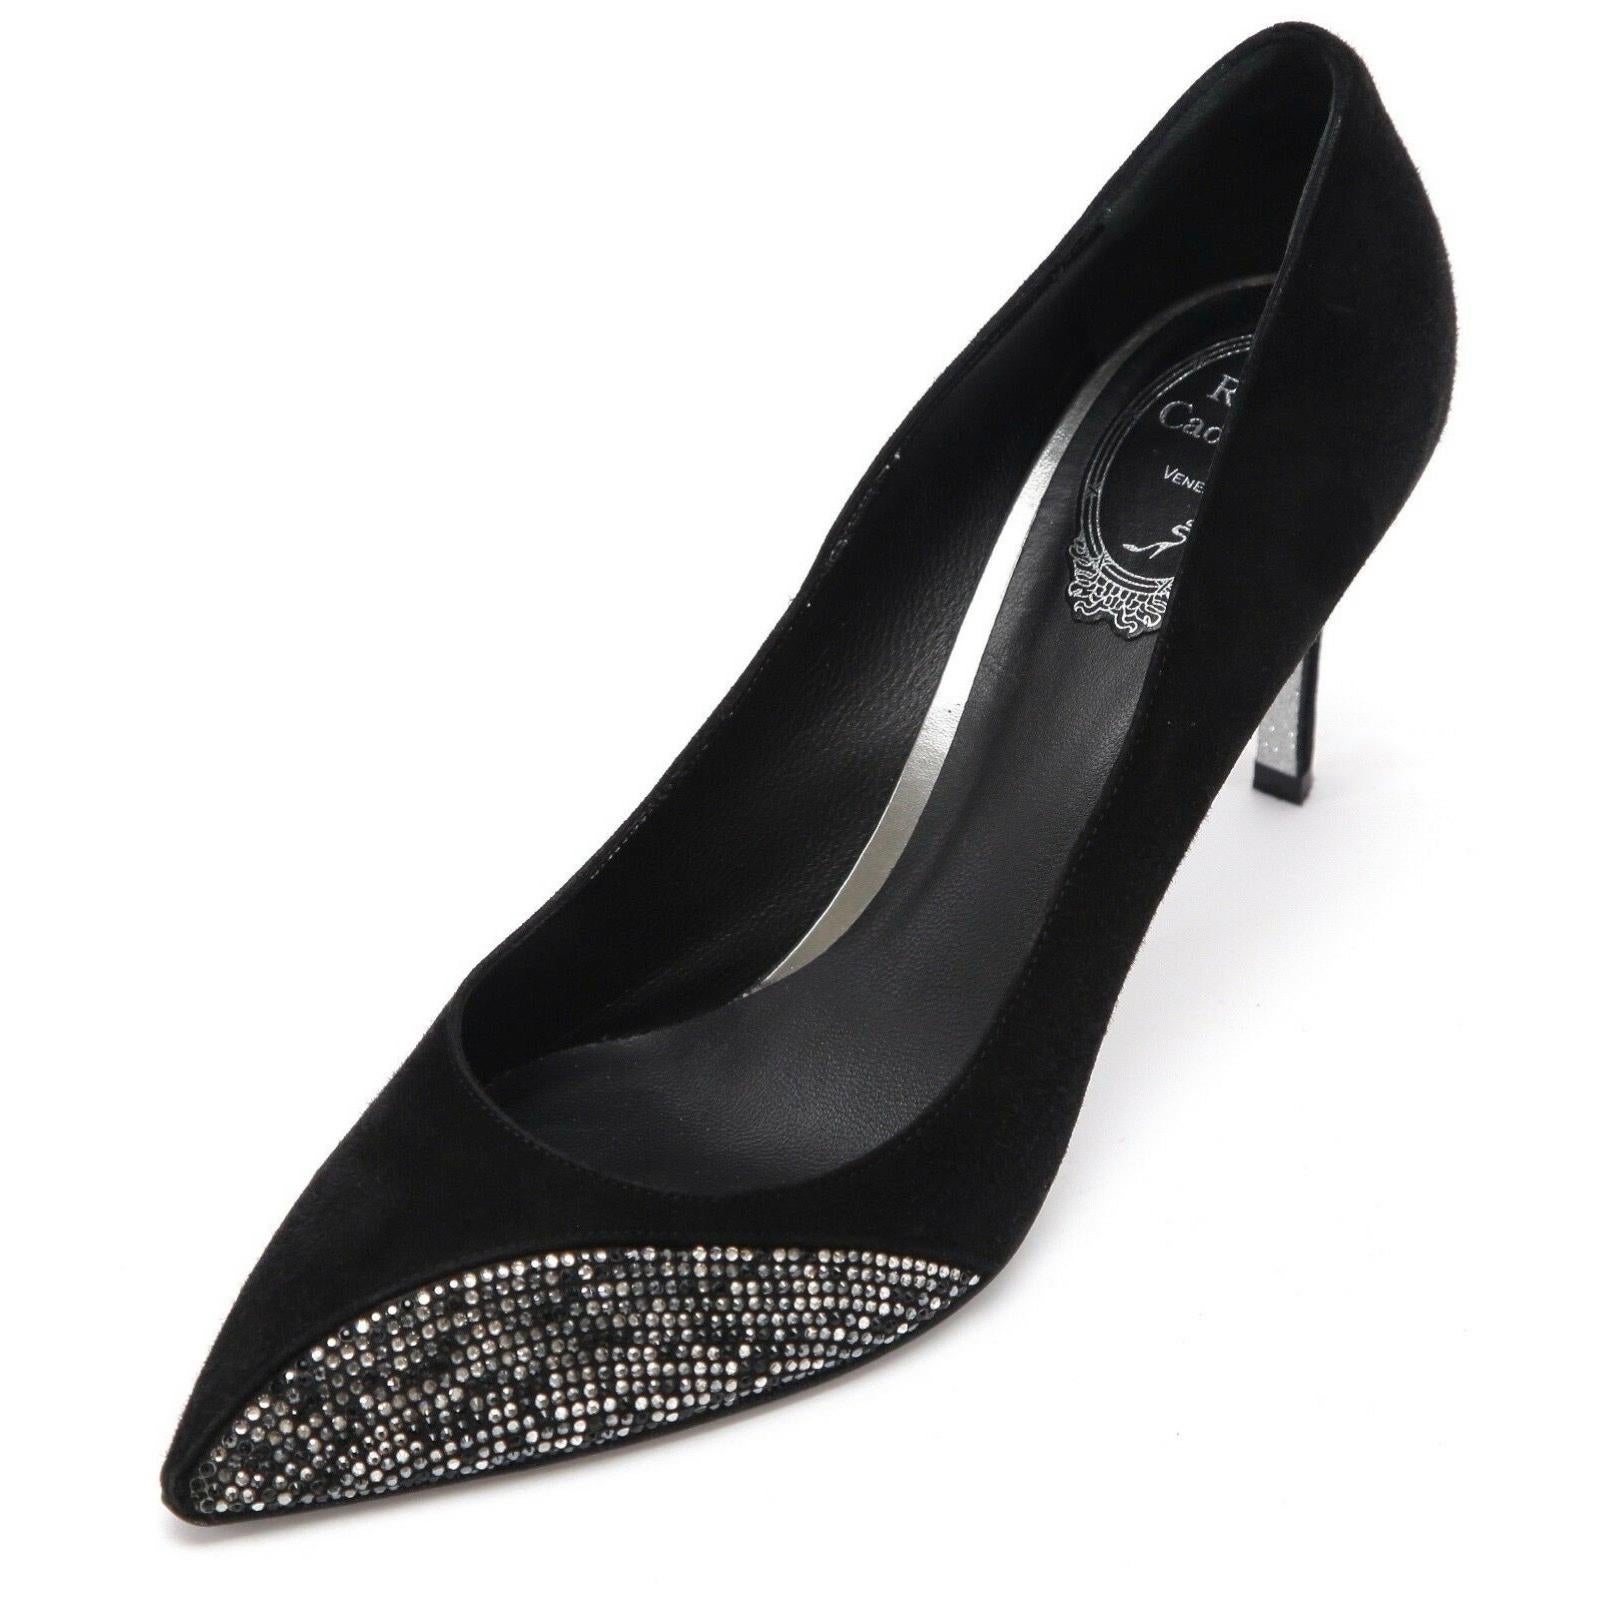 RENE CAOVILLA Pumps Black Suede Crystal Pointed Toe Heel Sz 40 In Good Condition For Sale In Hollywood, FL